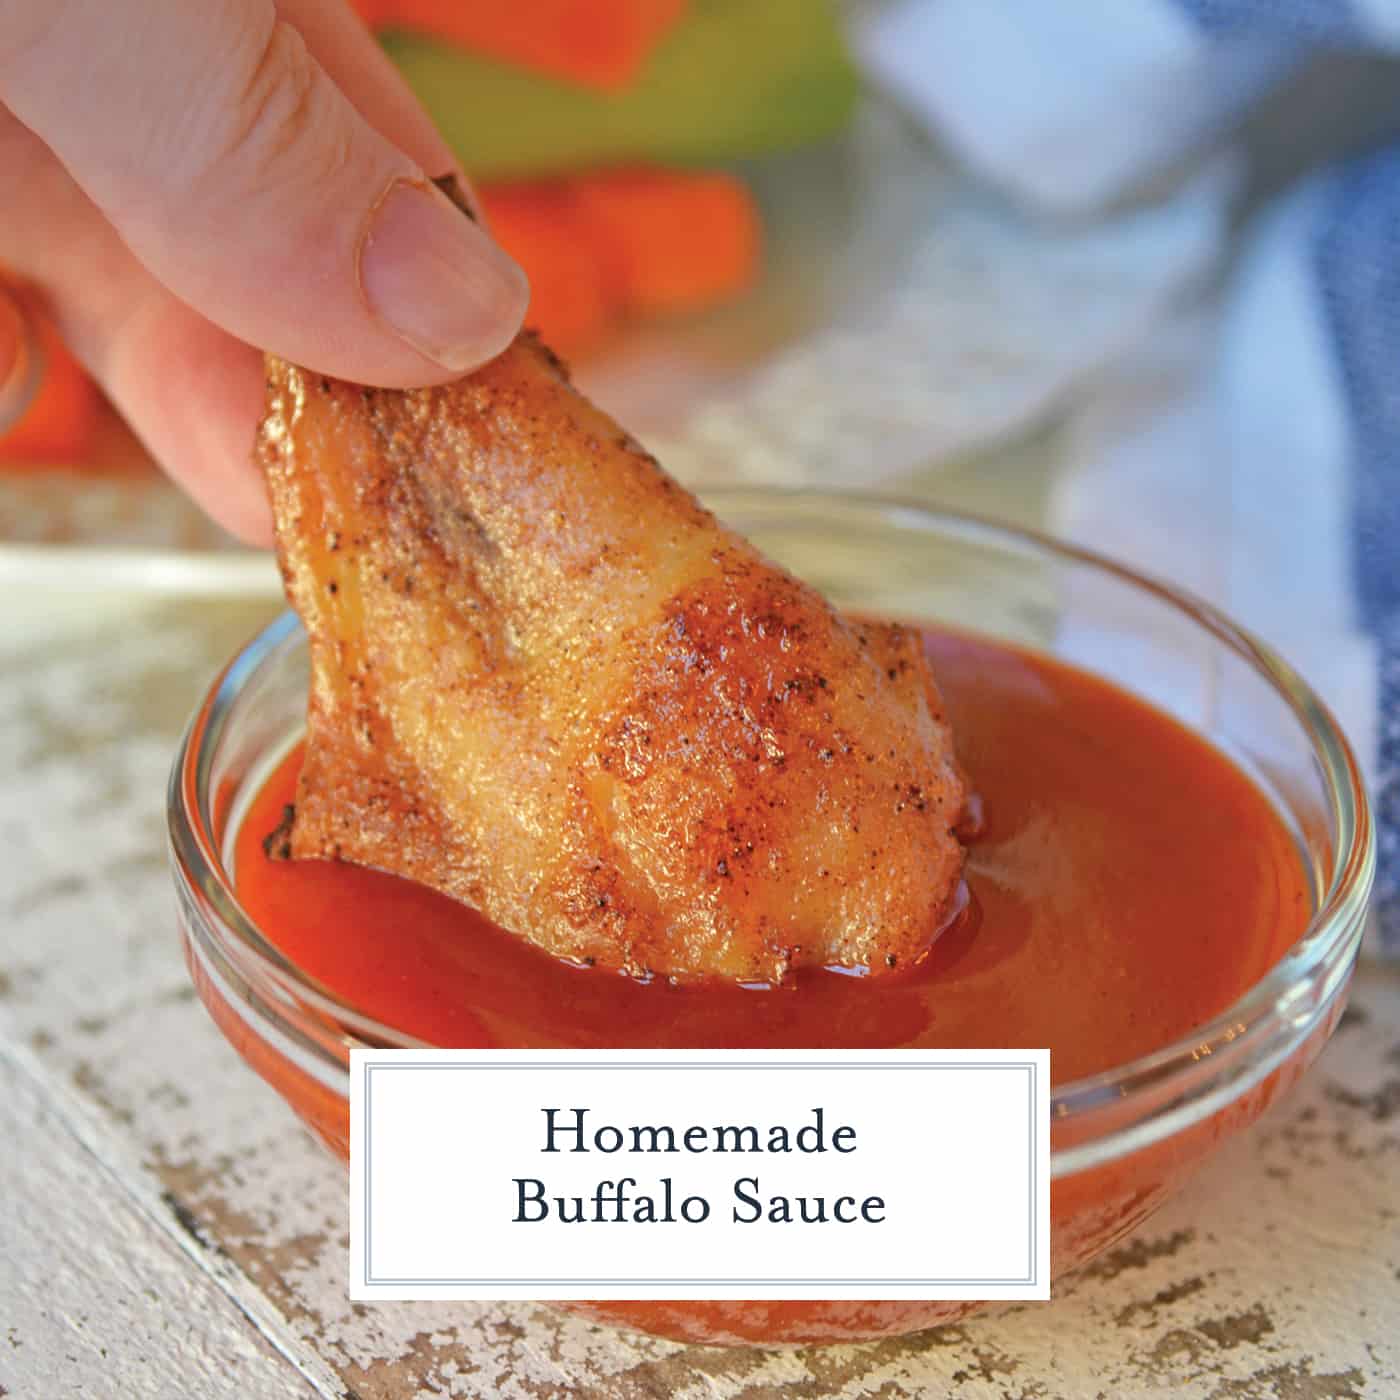 Homemade Buffalo Sauce is an easy blend of just two ingredients! Use other buffalo sauce ingredients to make fun twists for all your buffalo recipes! #buffalosauce #buffalosaucerecipe www.savoryexperiments.com 